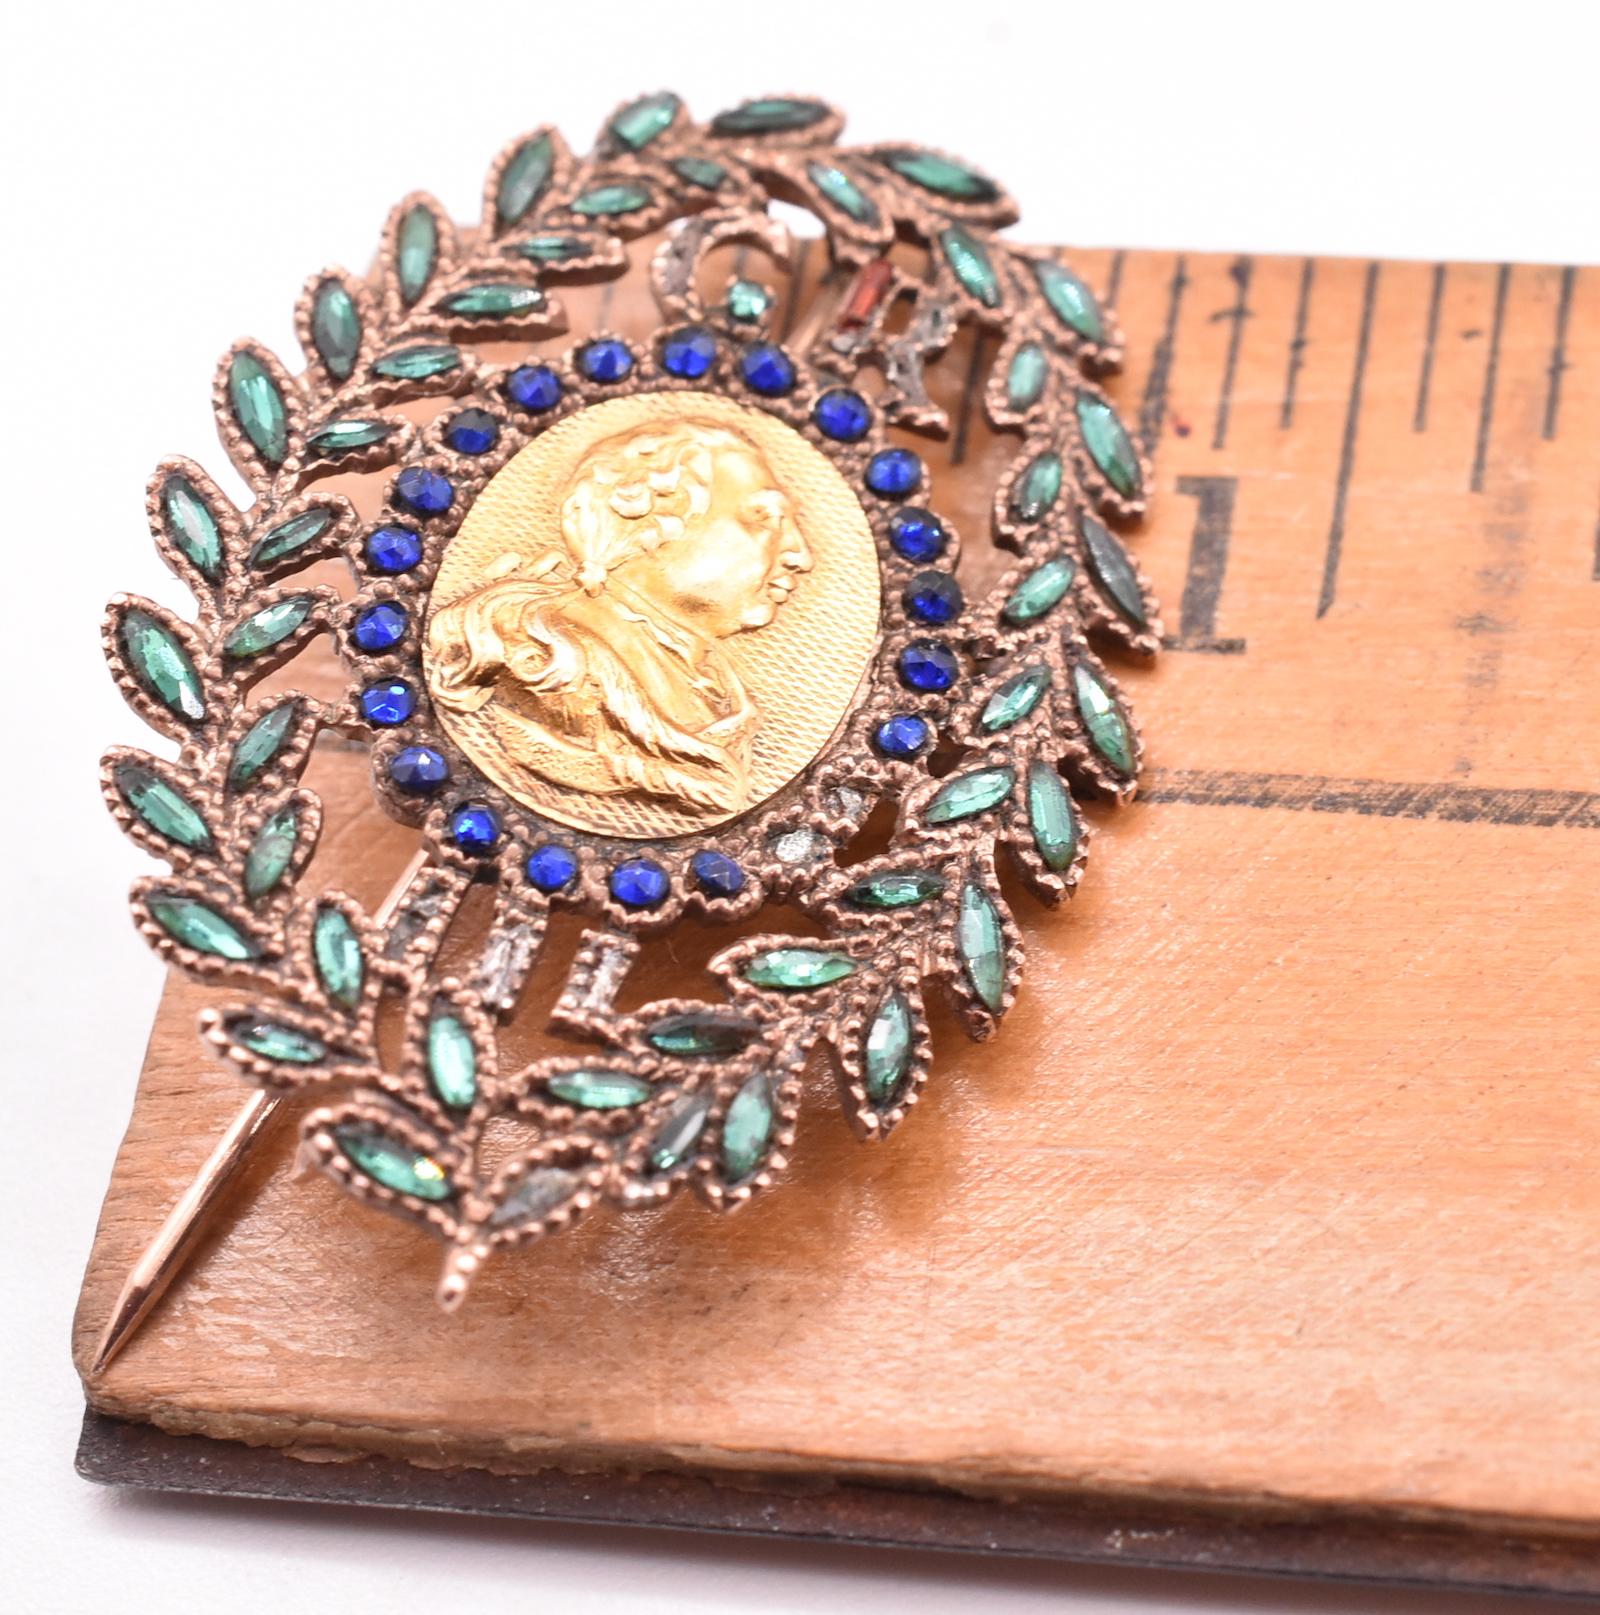 Rarely seen George III commemorative brooch with George III in profile at the center and decorated with a border of blue and green Vauxhall glass. This historical brooch was thought to have been made to celebrate George III's recovery from porphyria